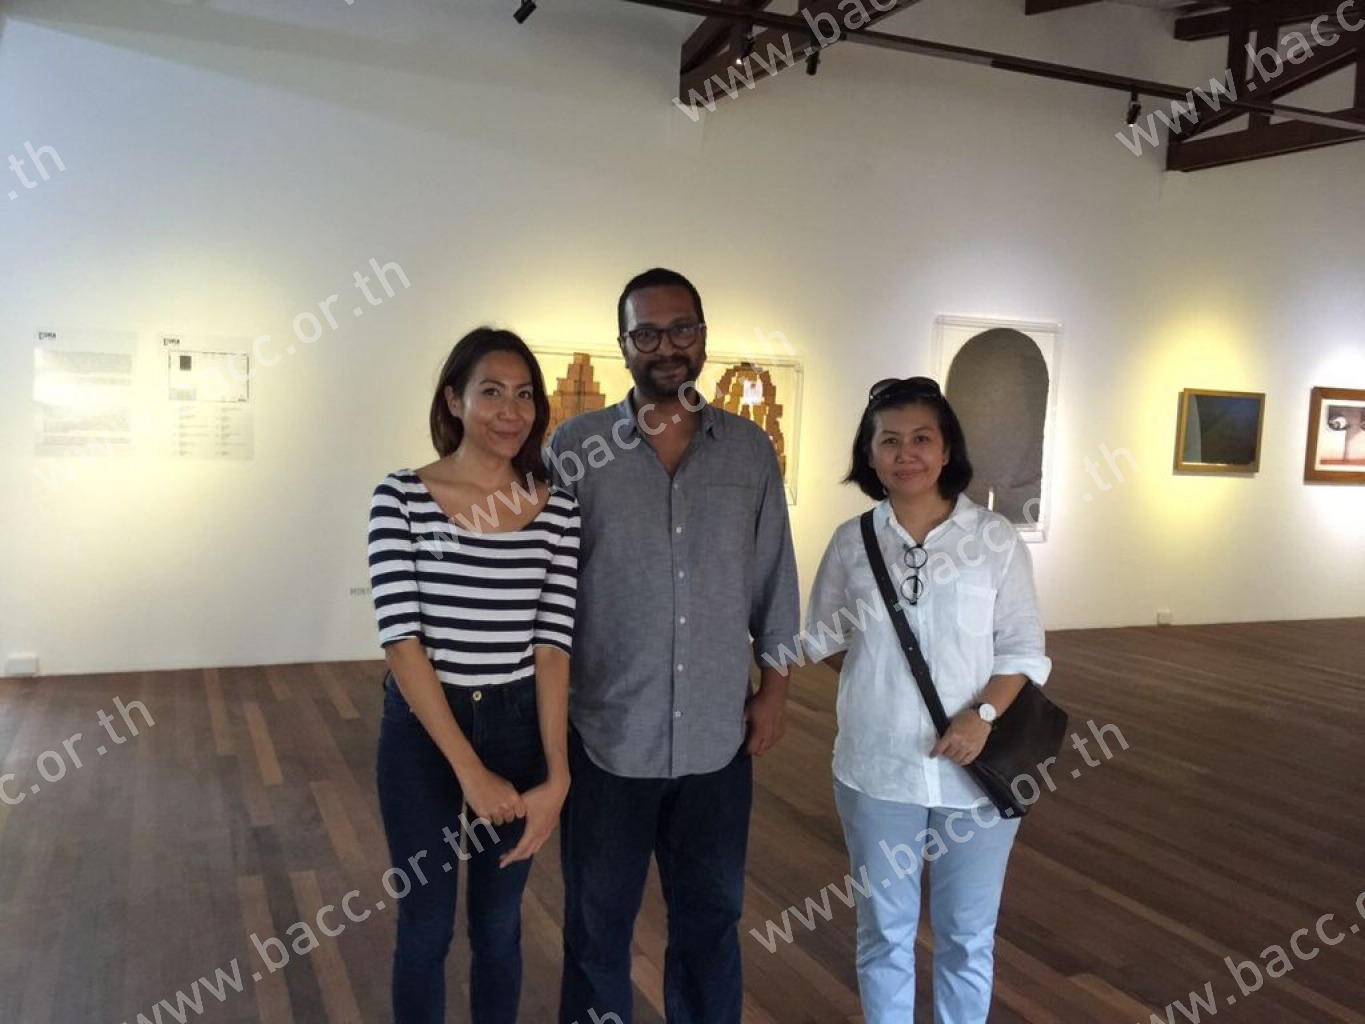 Indian artist Anup Mathew Thomas, winner of the 2015  Han Nefkens Foundation – BACC Award for Contemporary Art 